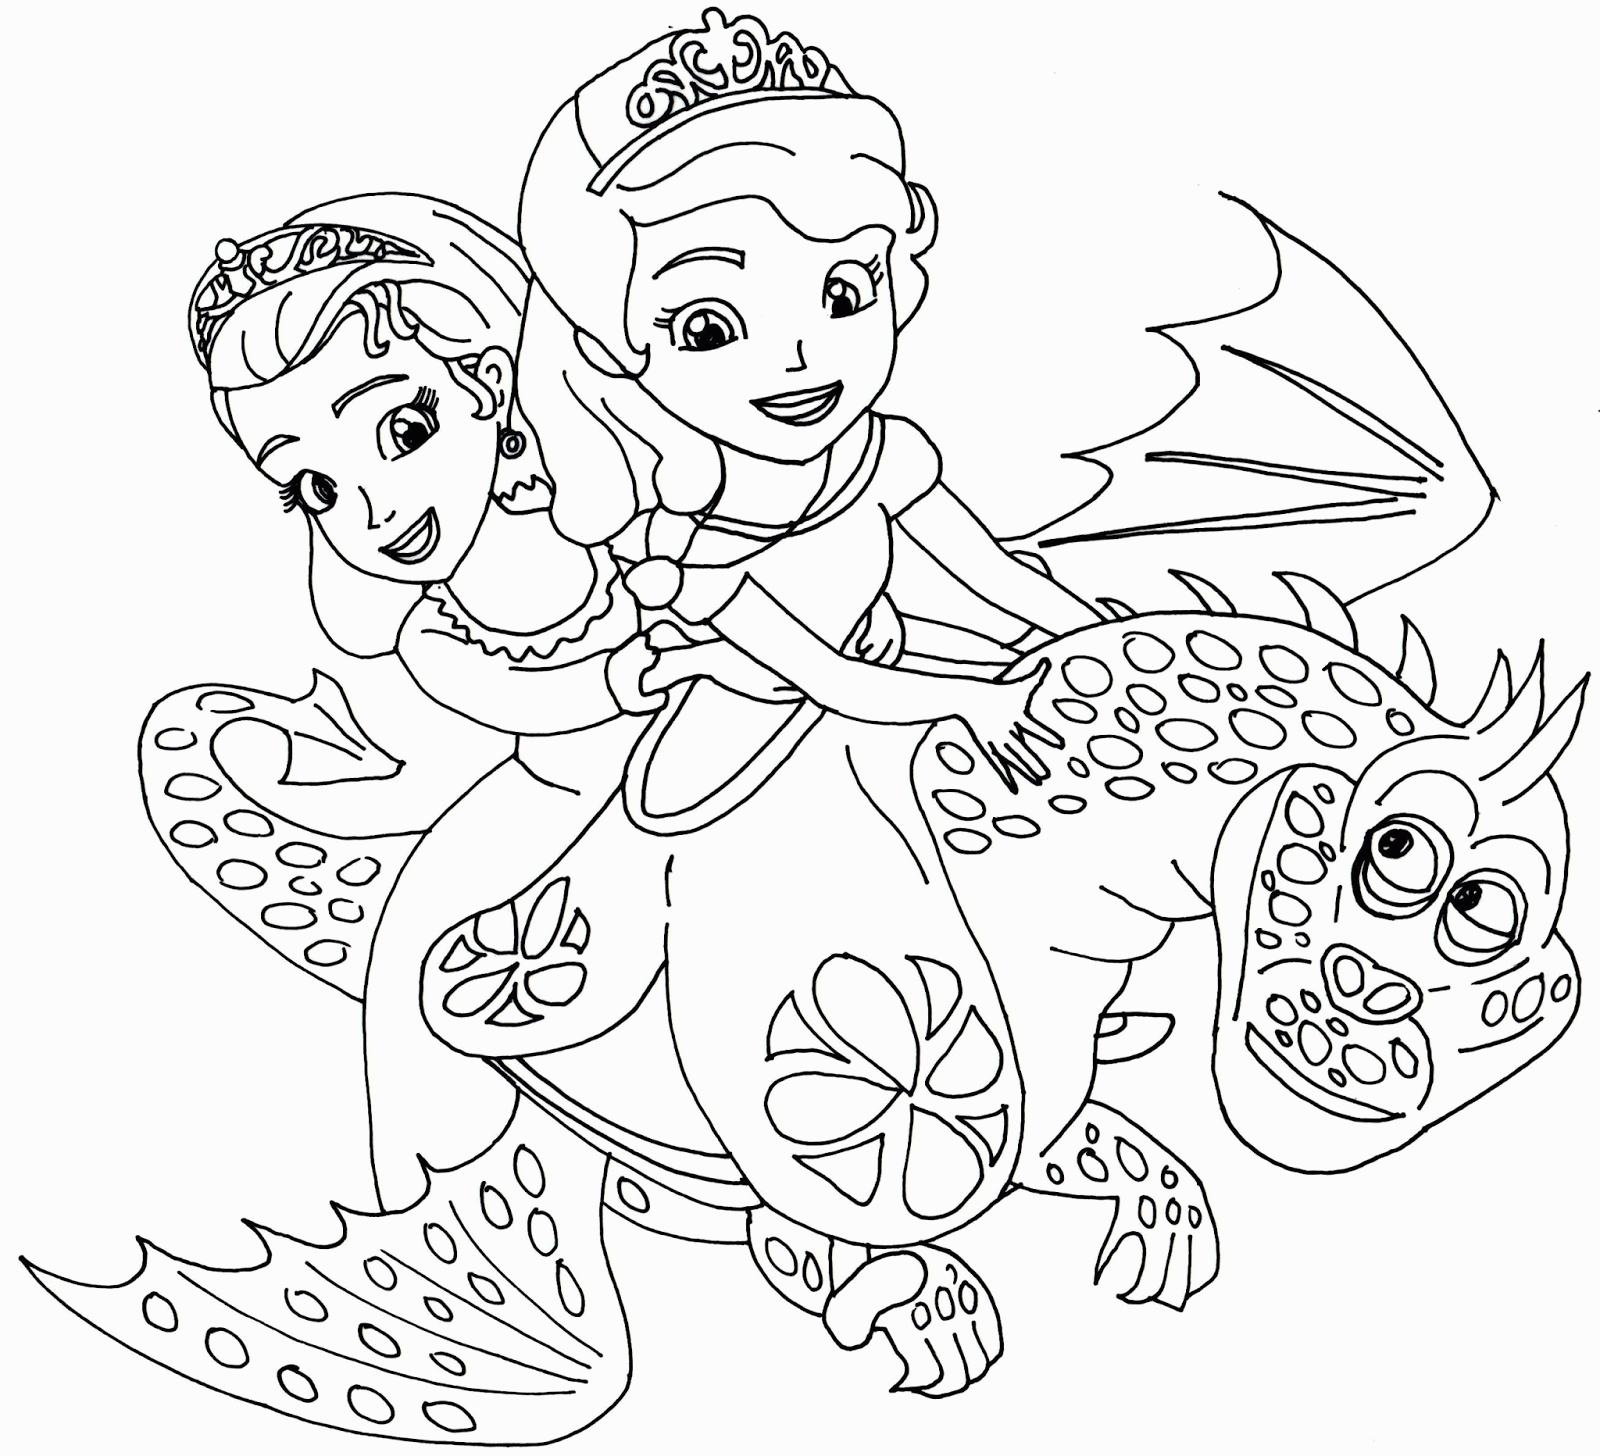 Sofia the First Coloring Pages Cartoons Sofia the First Crackle the Dragon Printable 2020 5882 Coloring4free